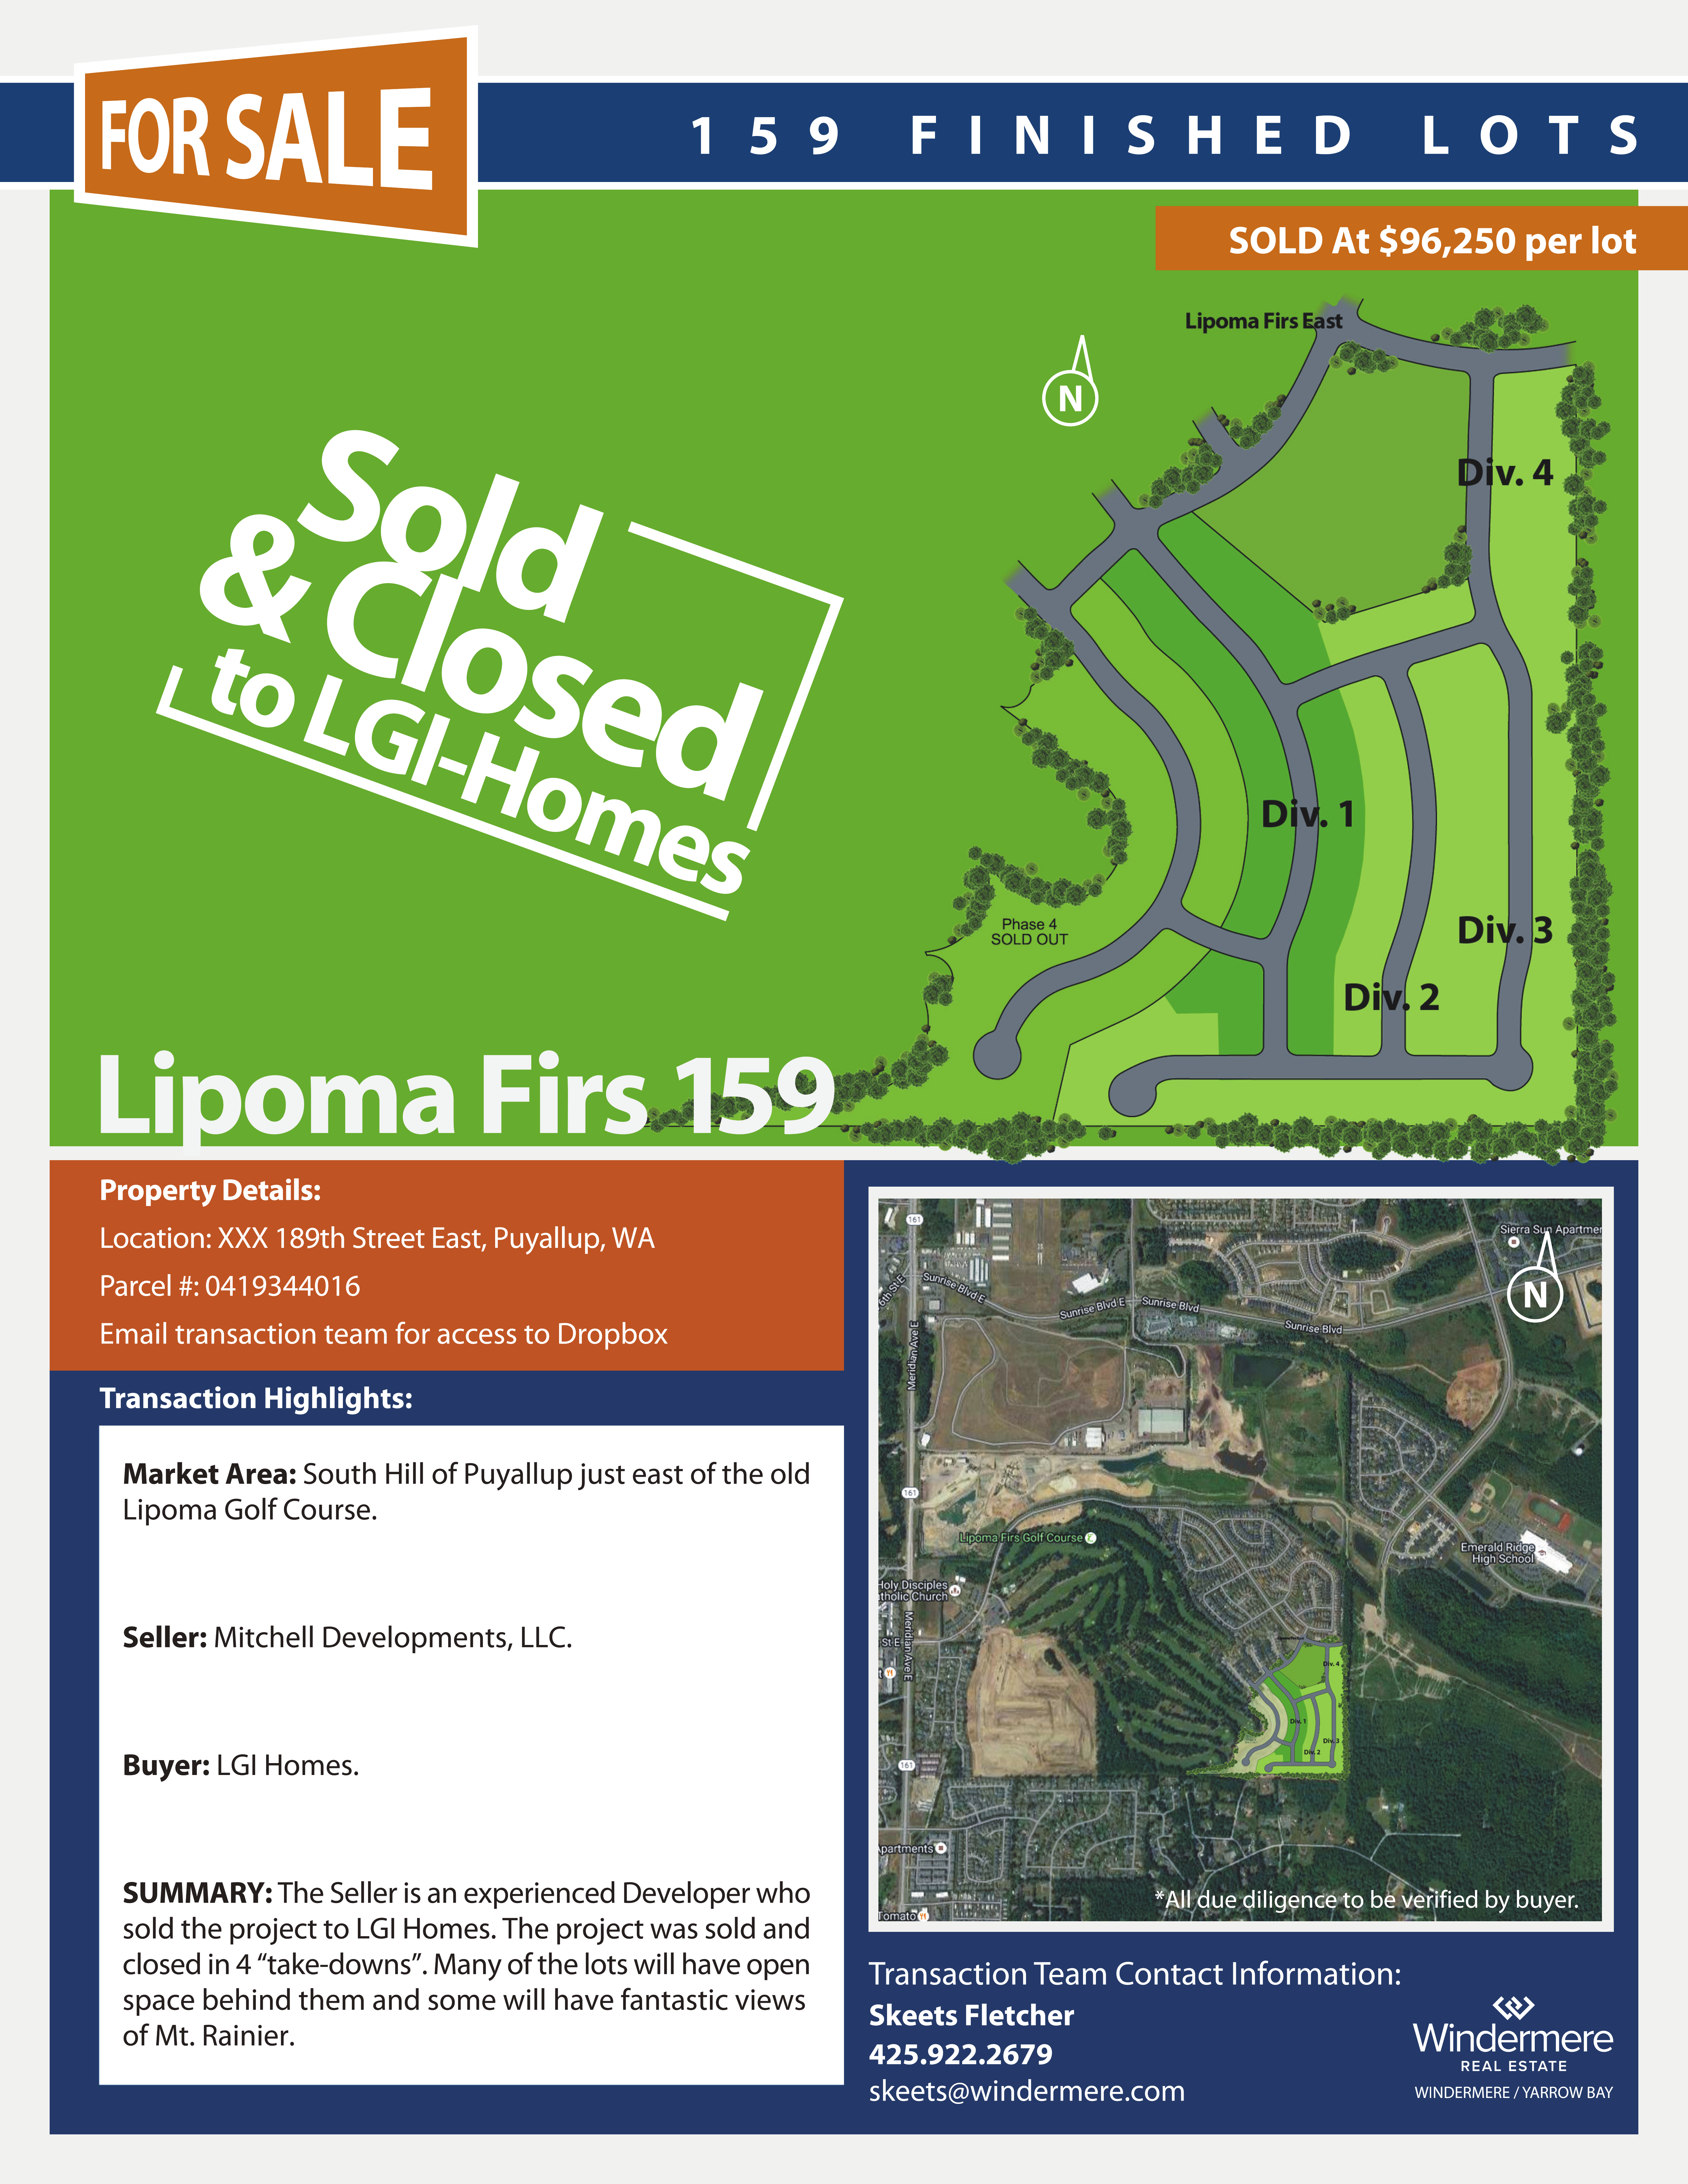 11.13.18 Lipoma Firs 159 Flyer - Sold_001